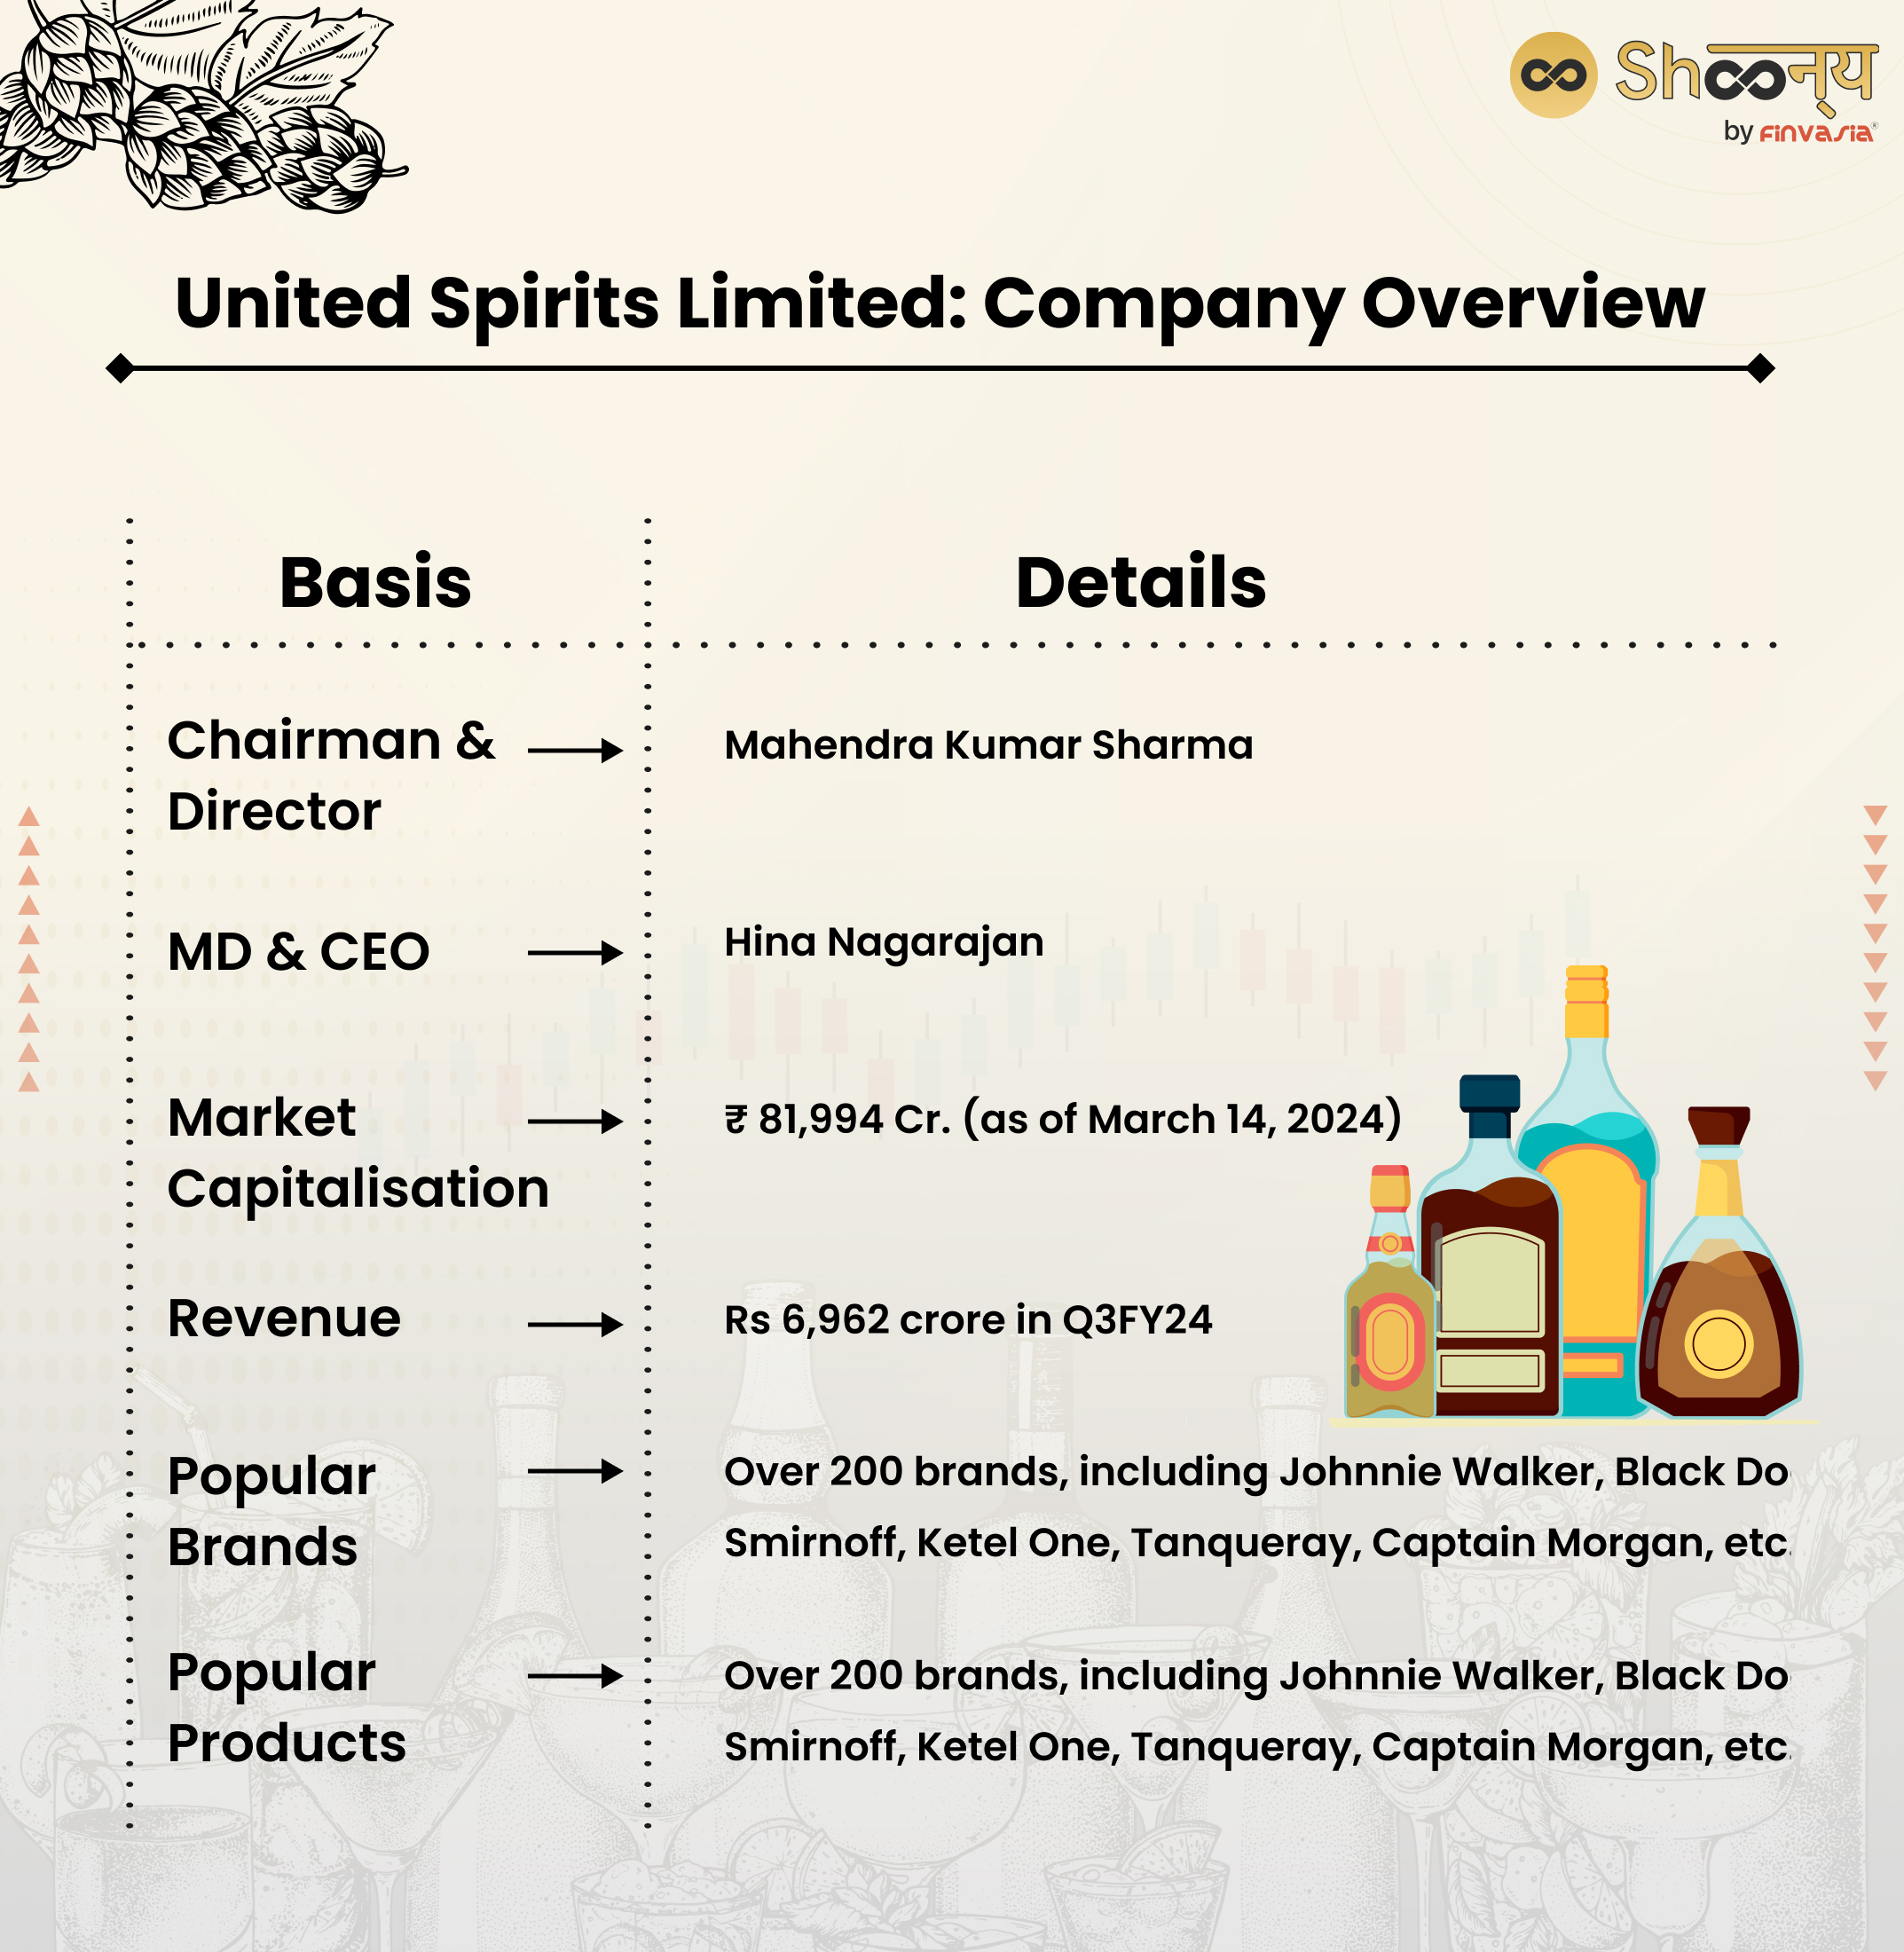 United Spirits Limited: Company Overview